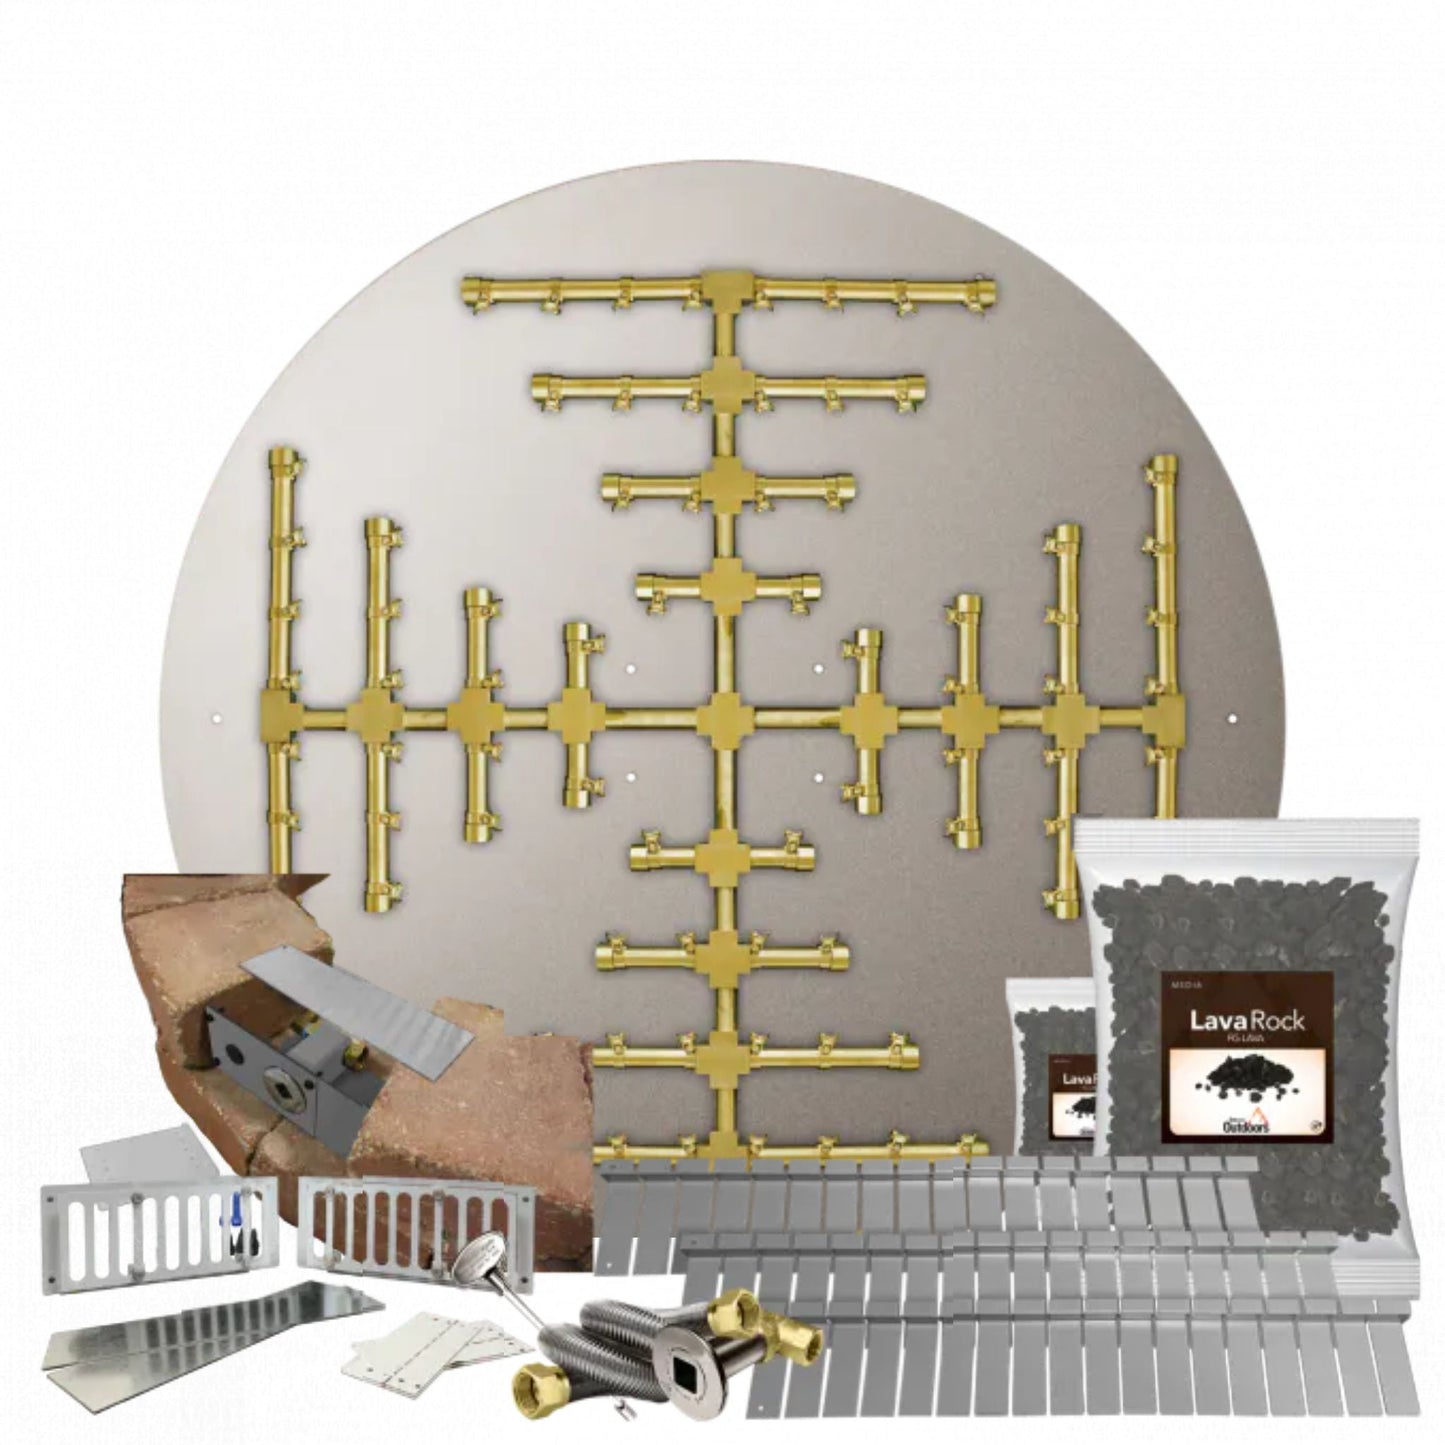 Firegear Pro Series 39" Round Natural Gas Snowflake Burner Paver Kit With Stainless Steel Flat Pan, 4" Vent Kit and Match Throw Ignition System